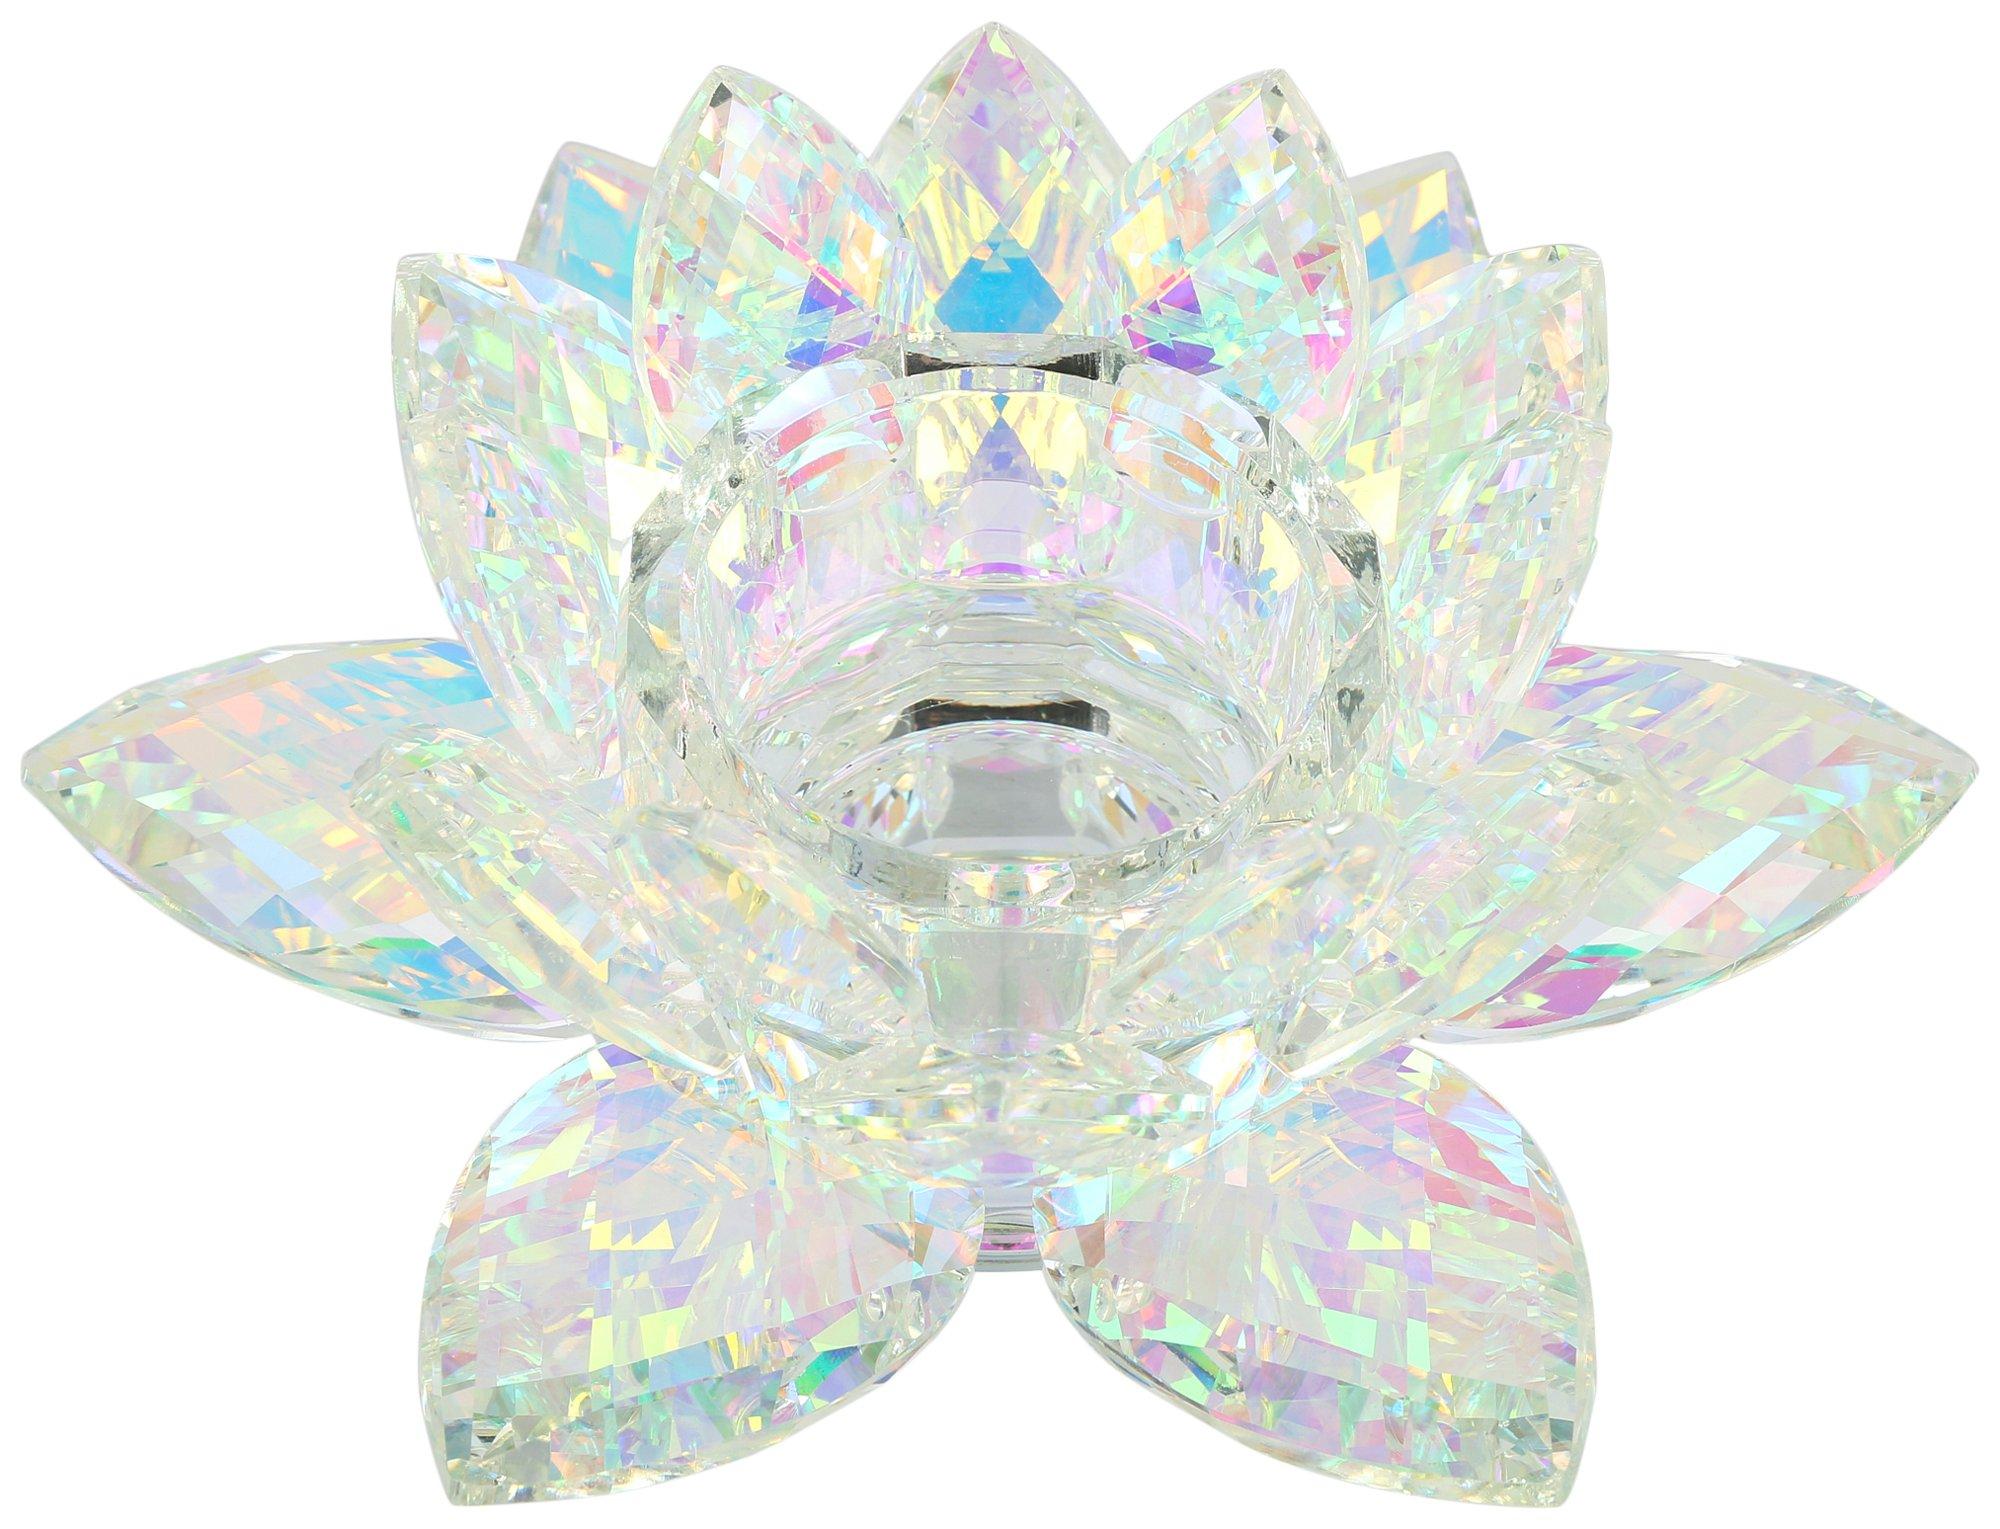 8in Rainbow Crystal Lotus Candle Holder